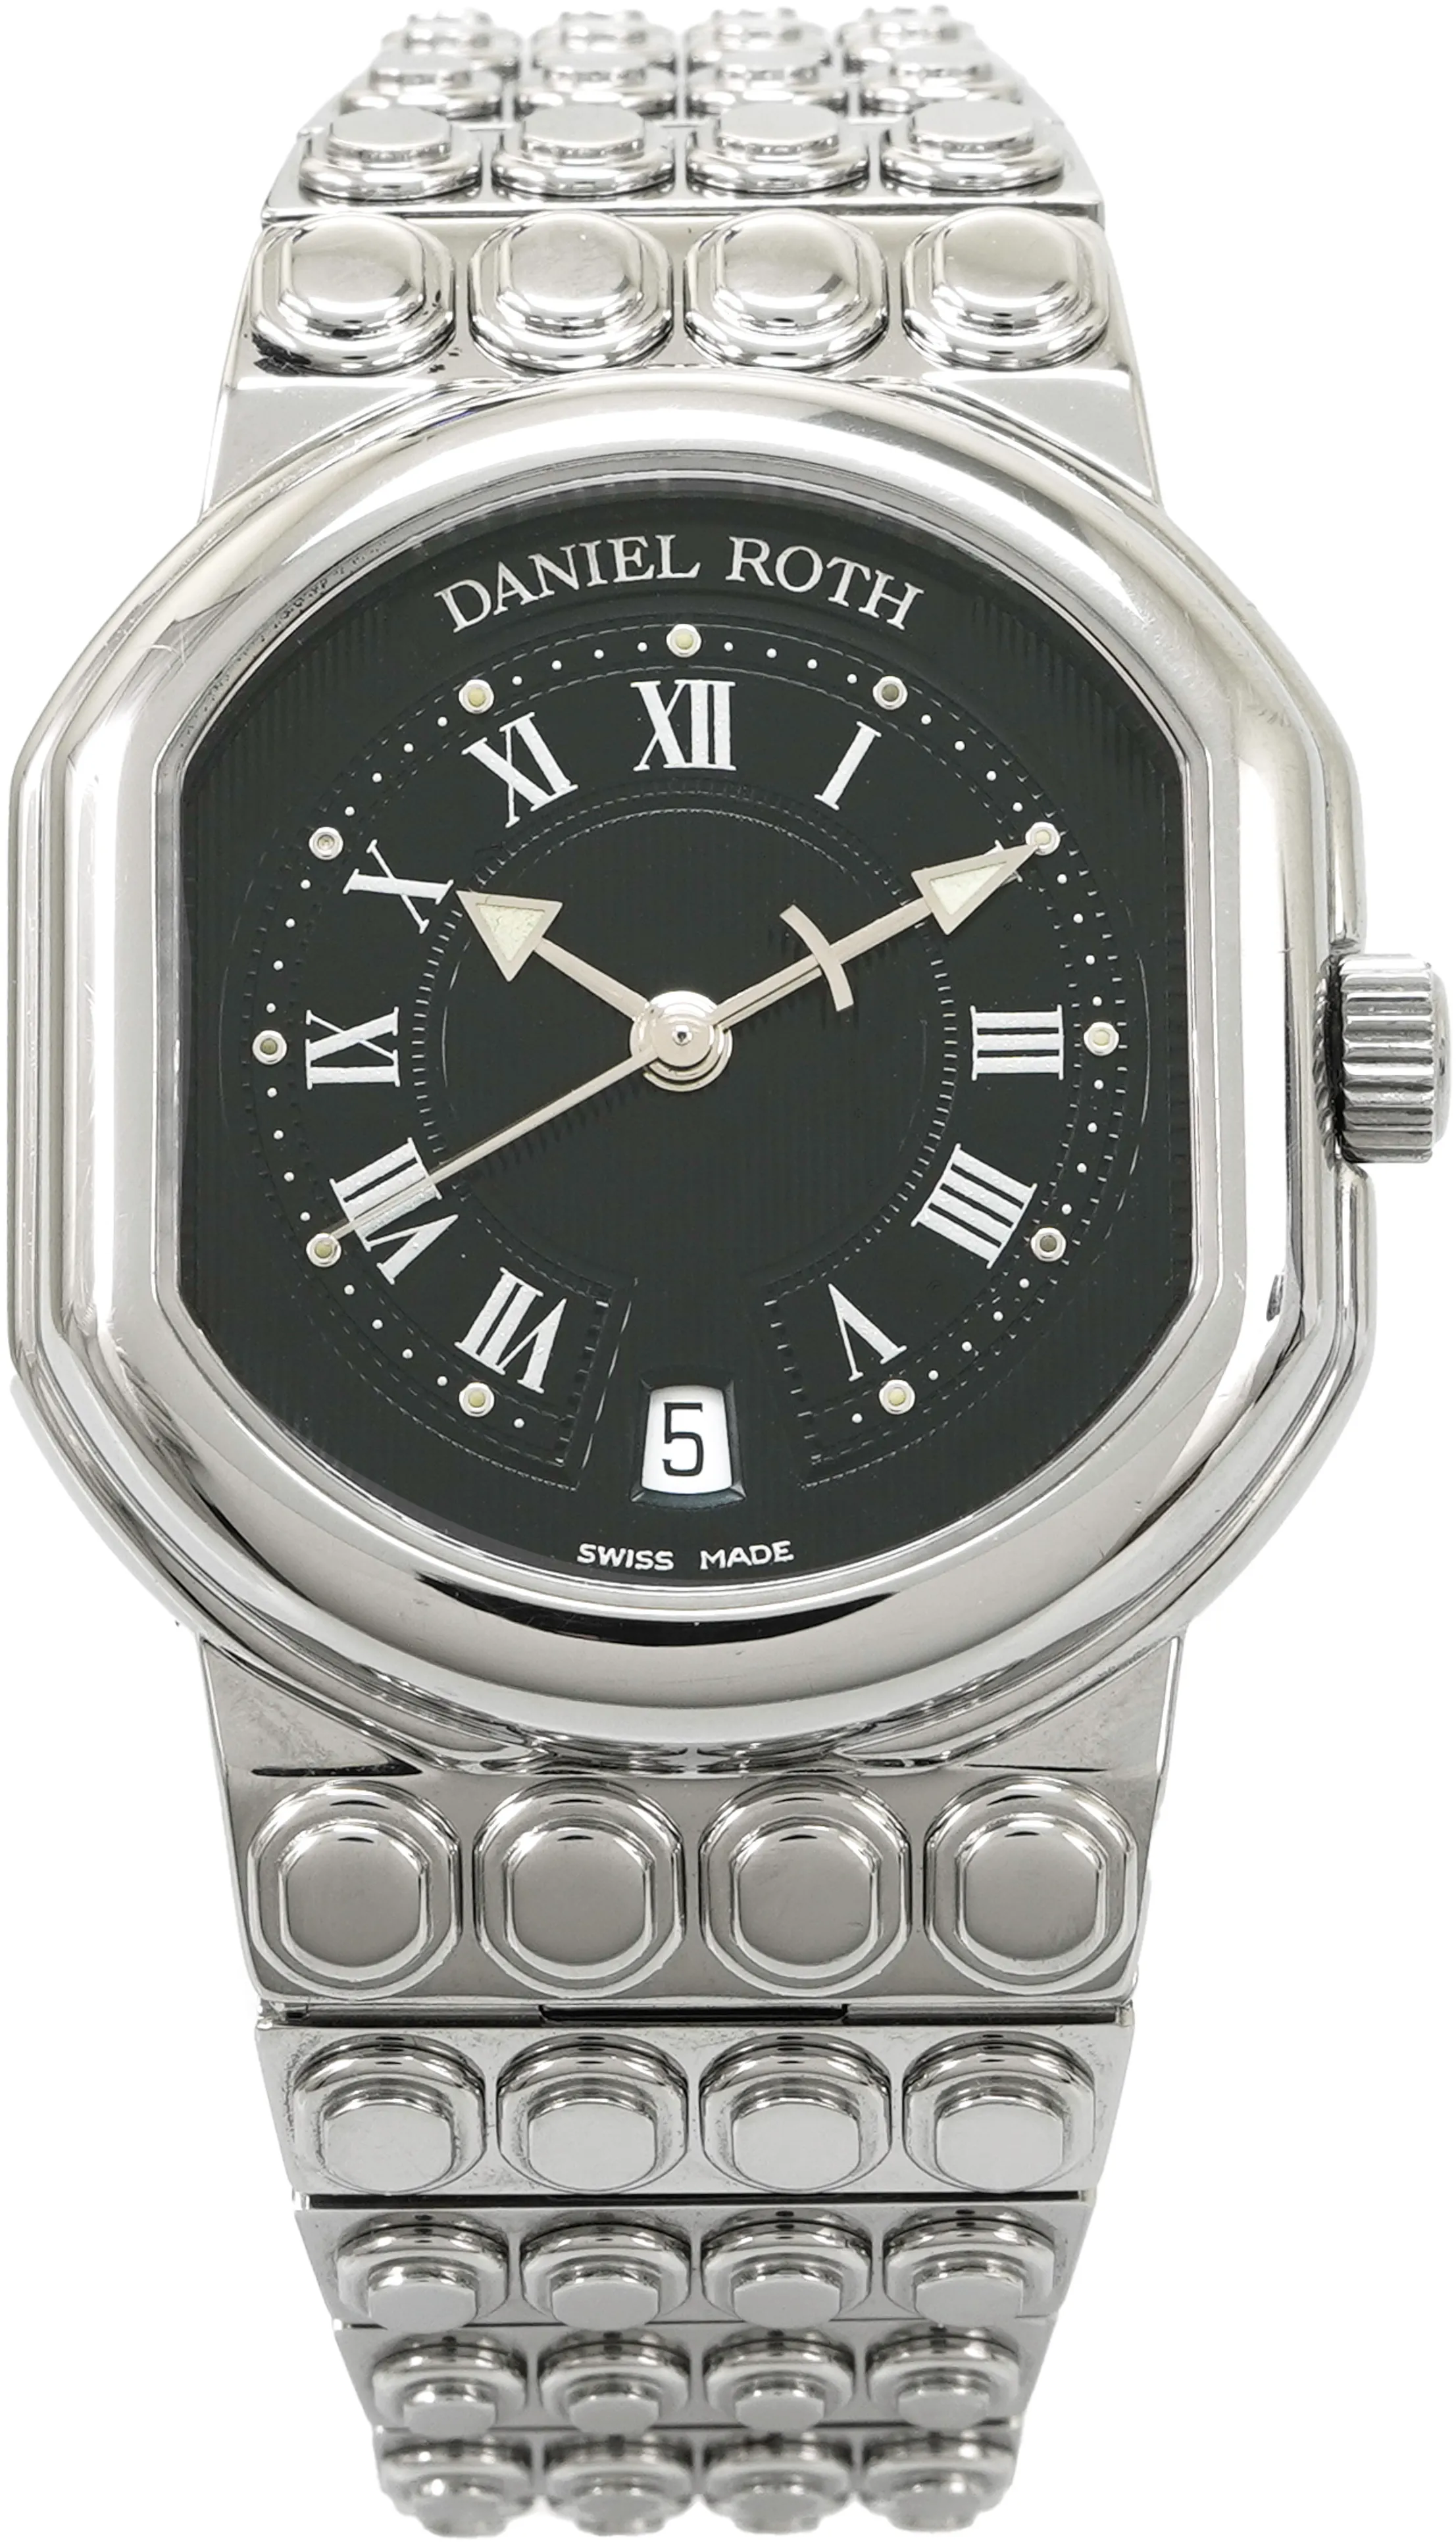 Daniel Roth S177-ST 32mm Stainless steel